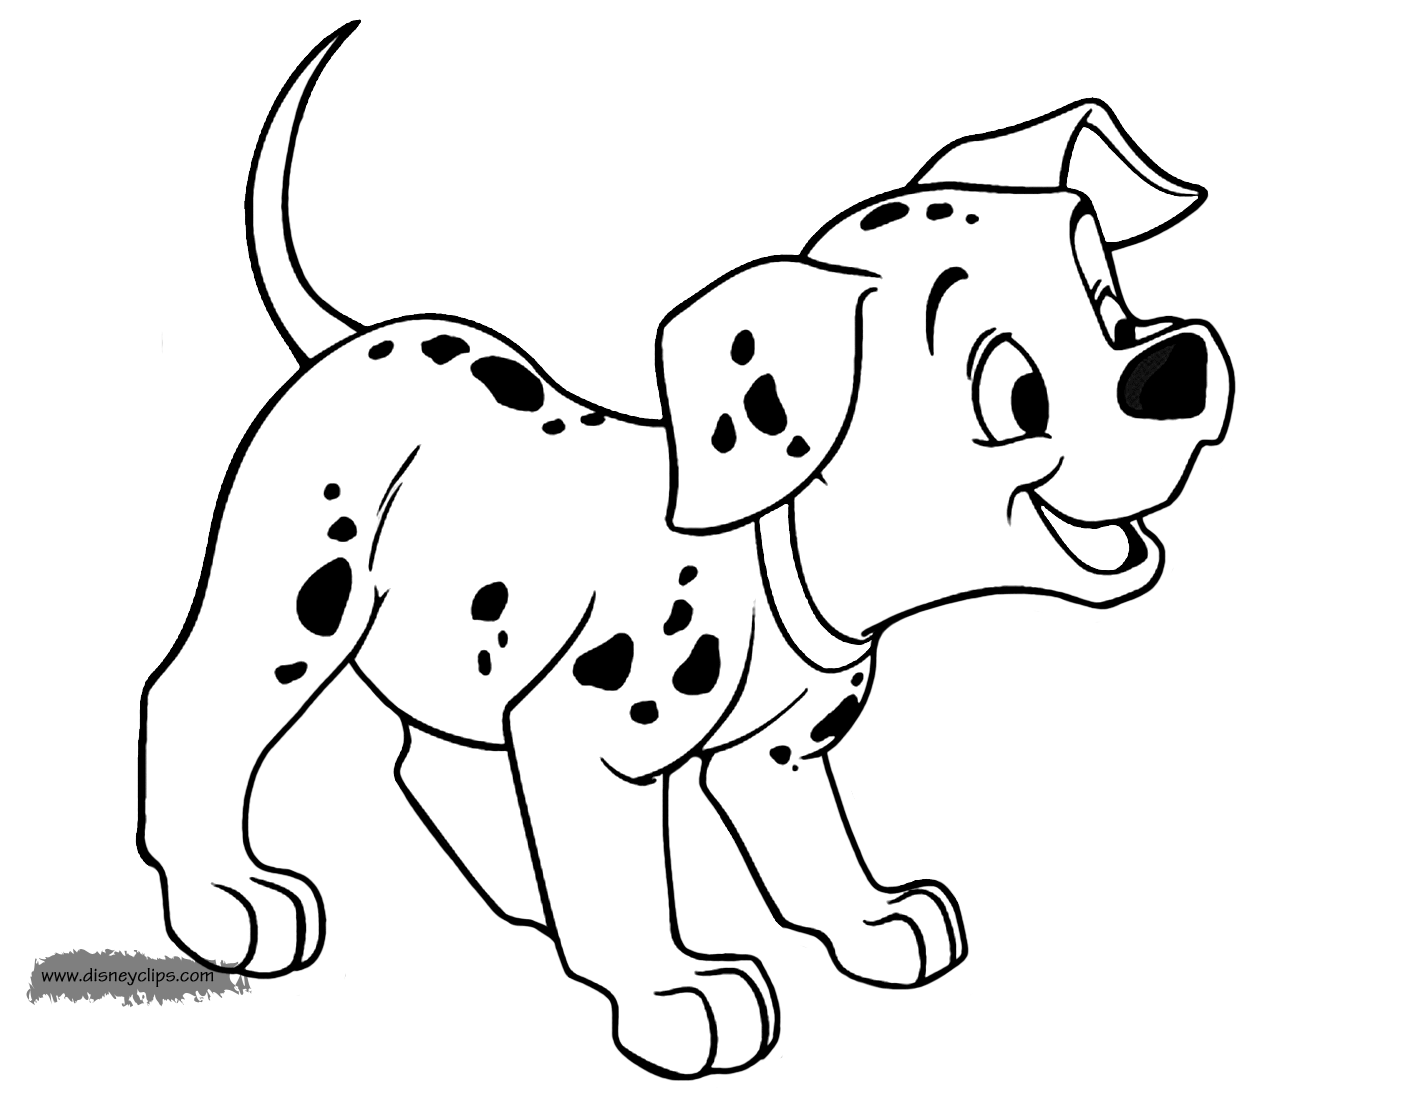 101 Dalmatians Coloring Pages 3 | Disney's World of Wonders